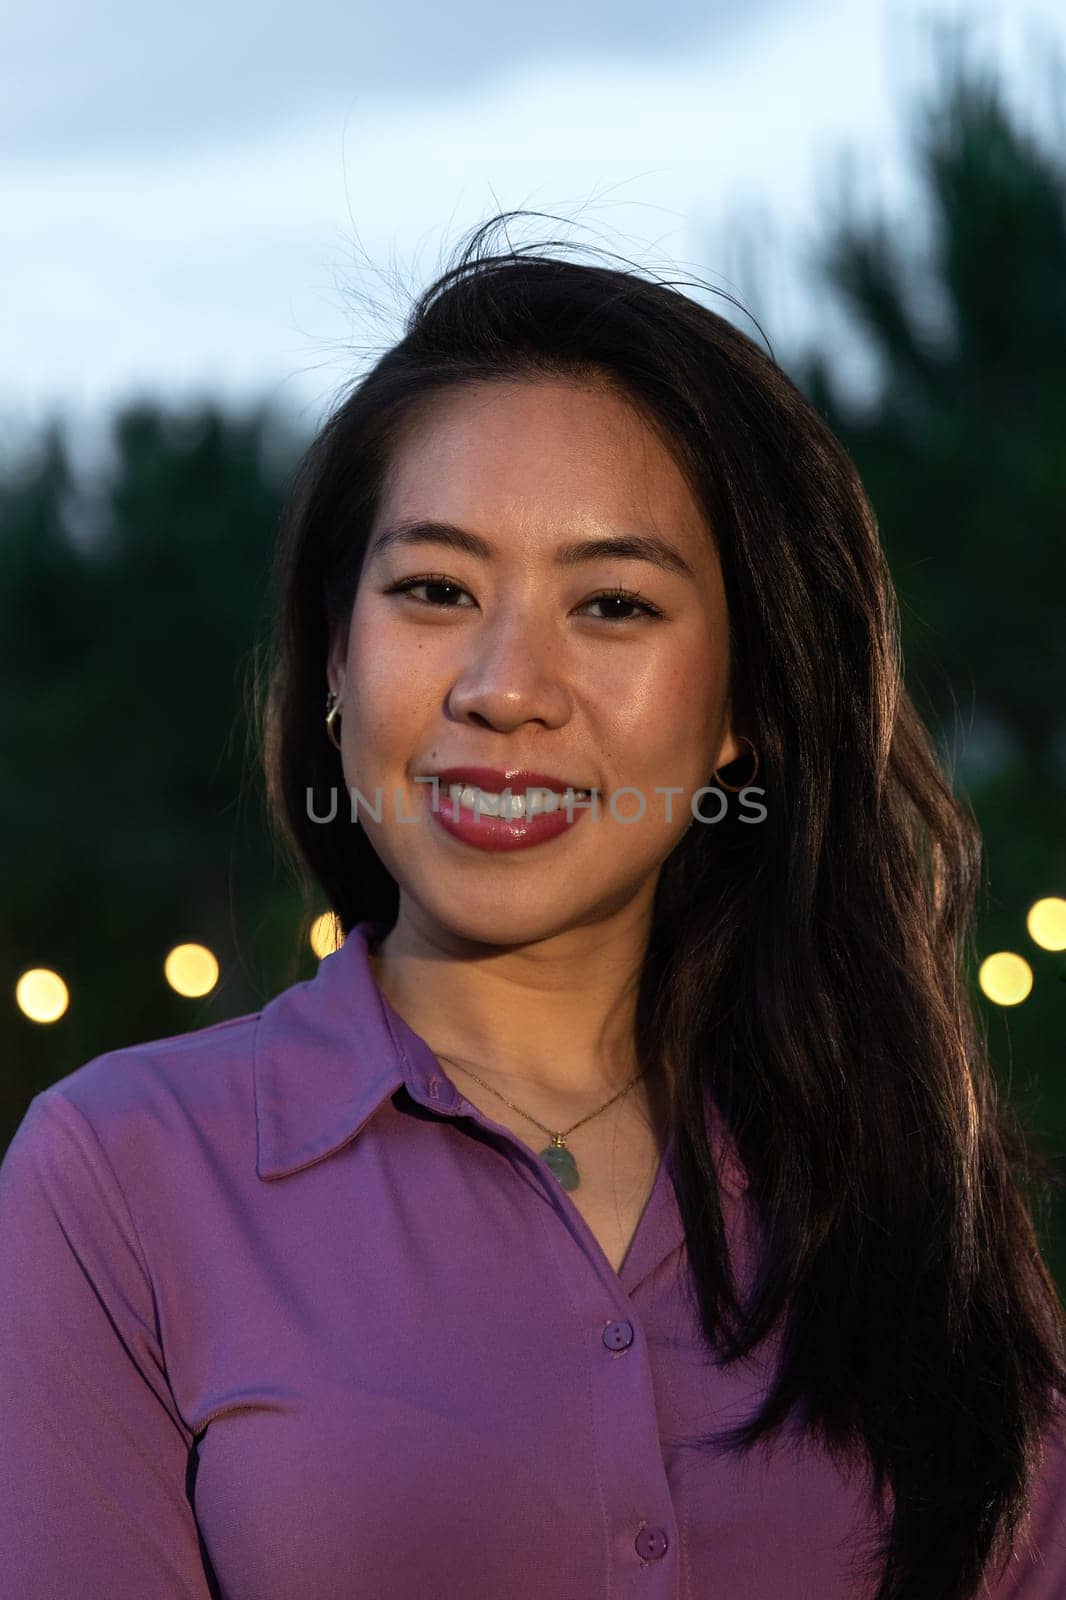 Vertical headshot of young smiling asian woman at sunset. Lifestyle.